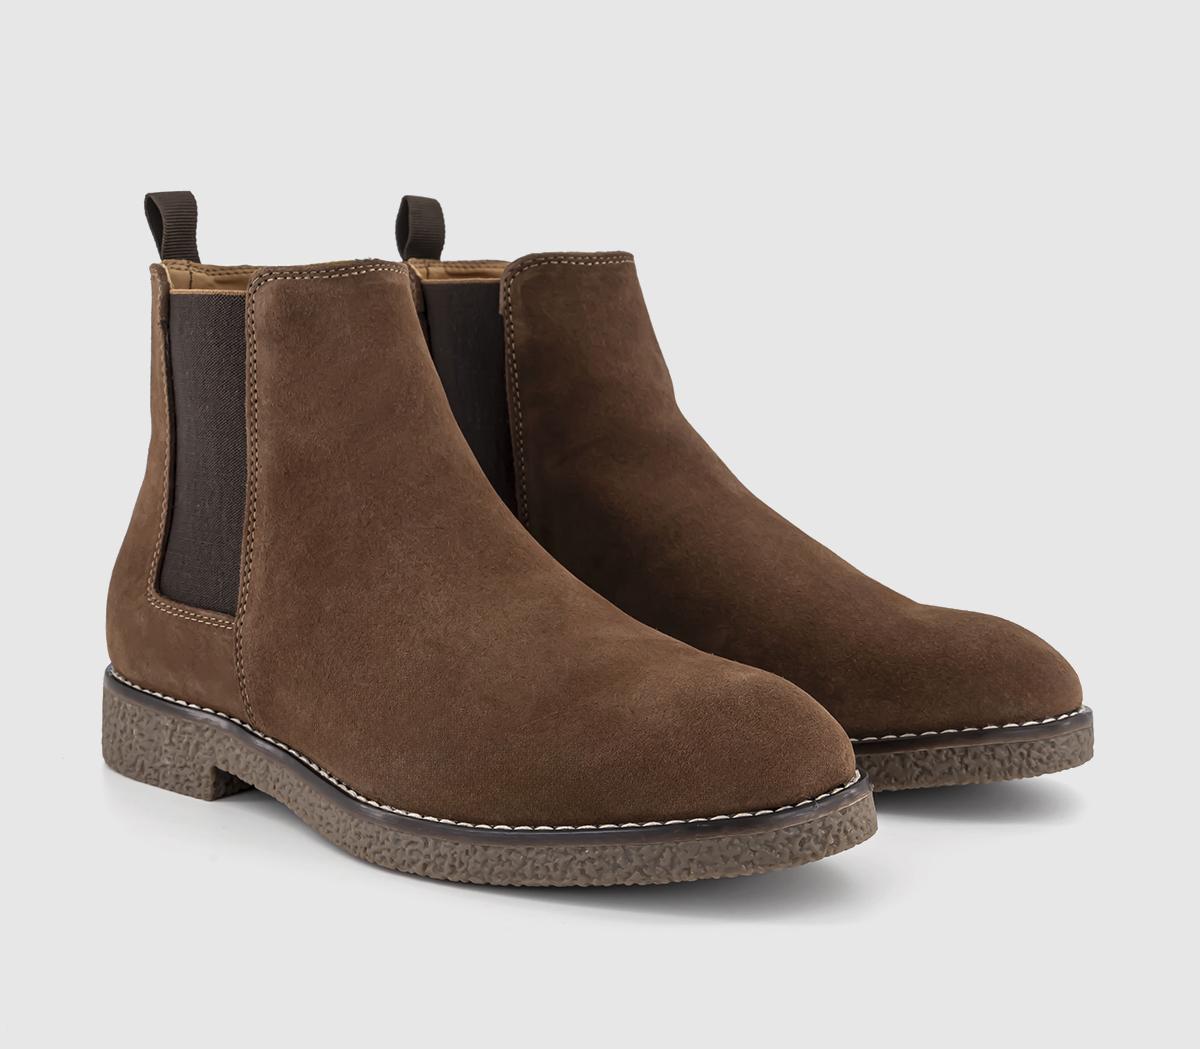 OFFICE Mens Bachelor Crepe Look Chelsea Boots Brown Suede, 8